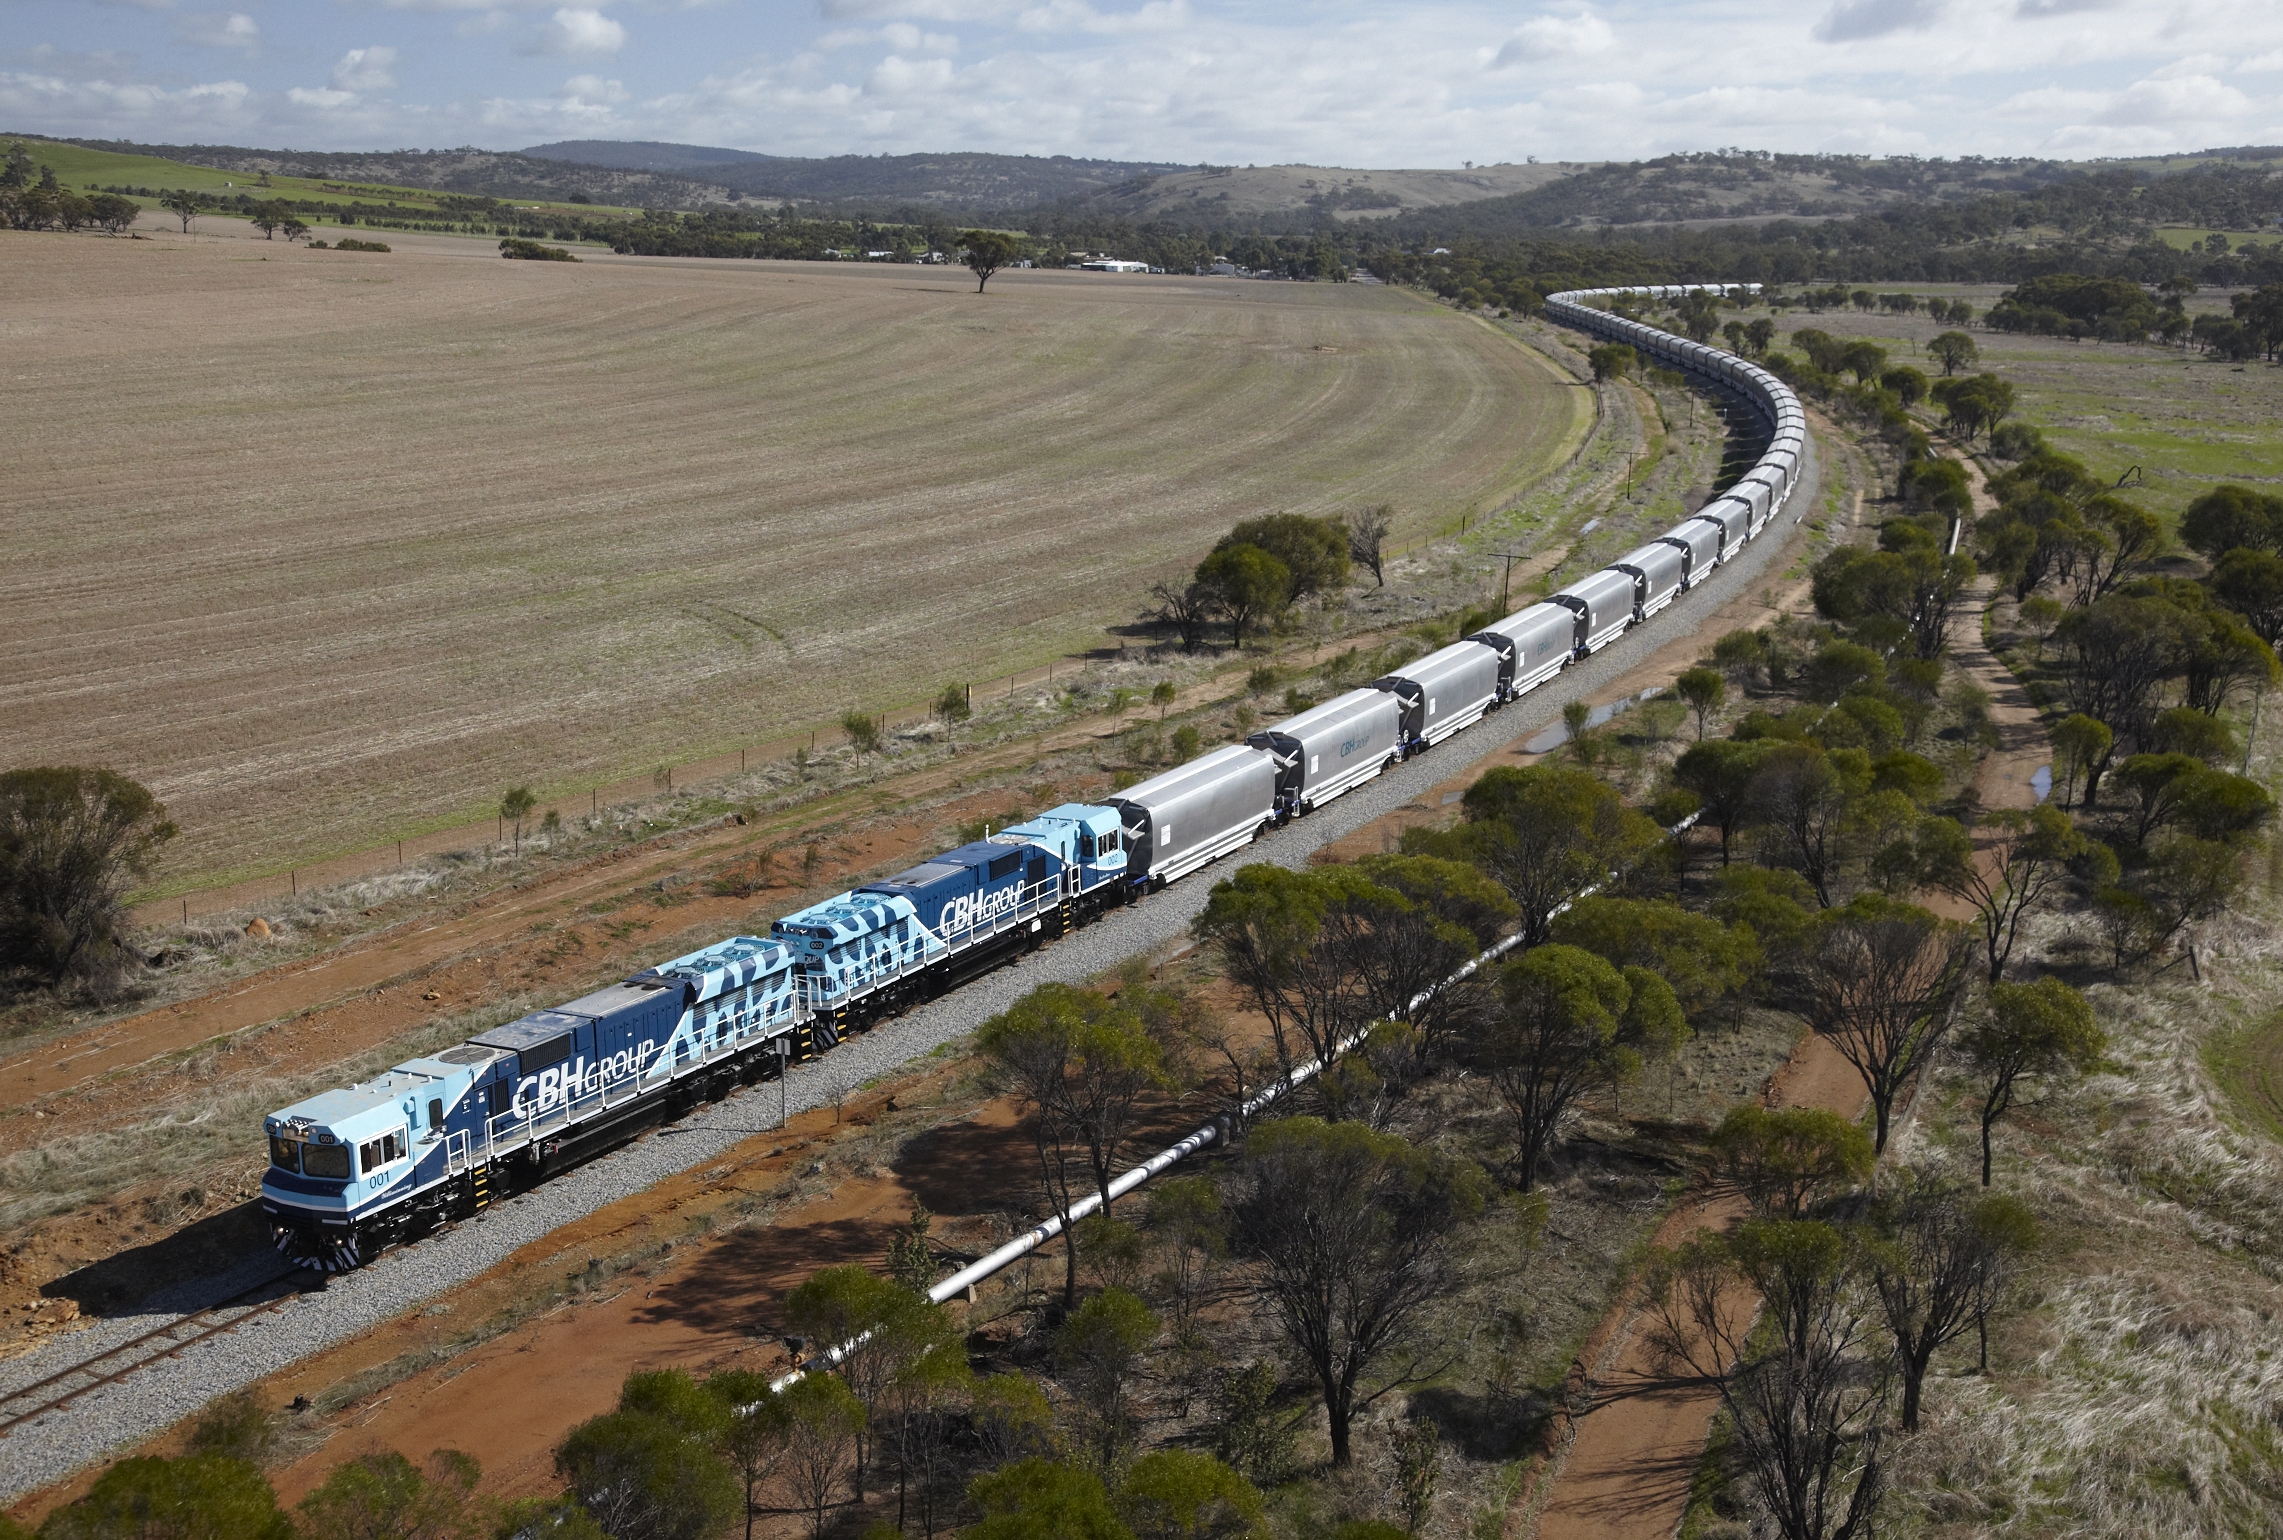 Aerial image of CBH first train passing through the Wheatbelt